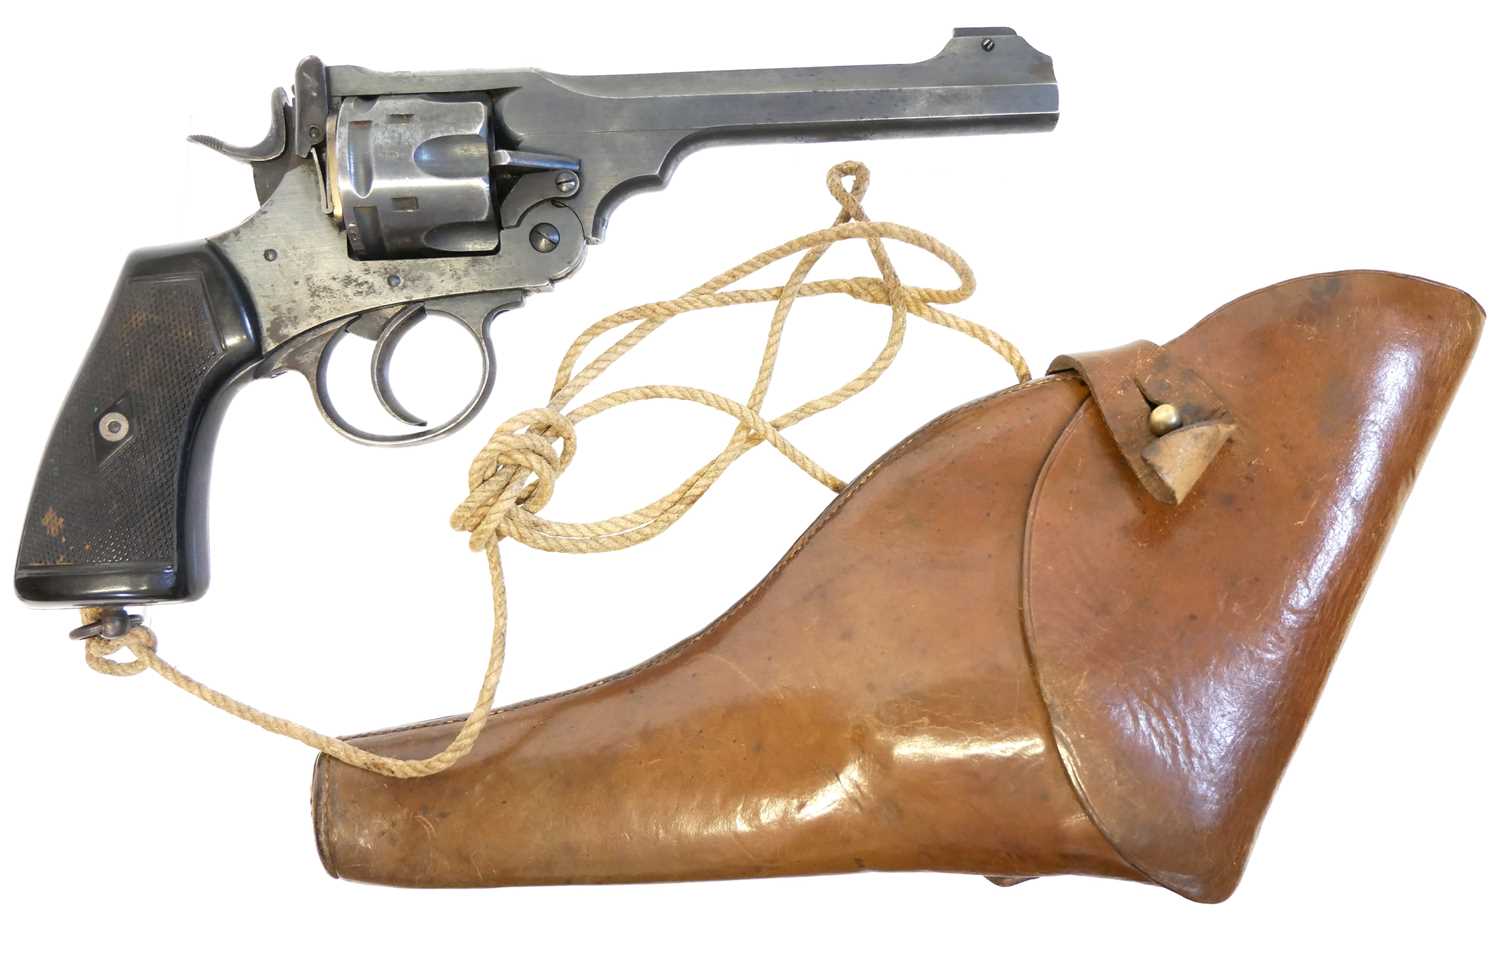 Lot 134 - Webley .455 Service Revolver LICENCE REQUIRED